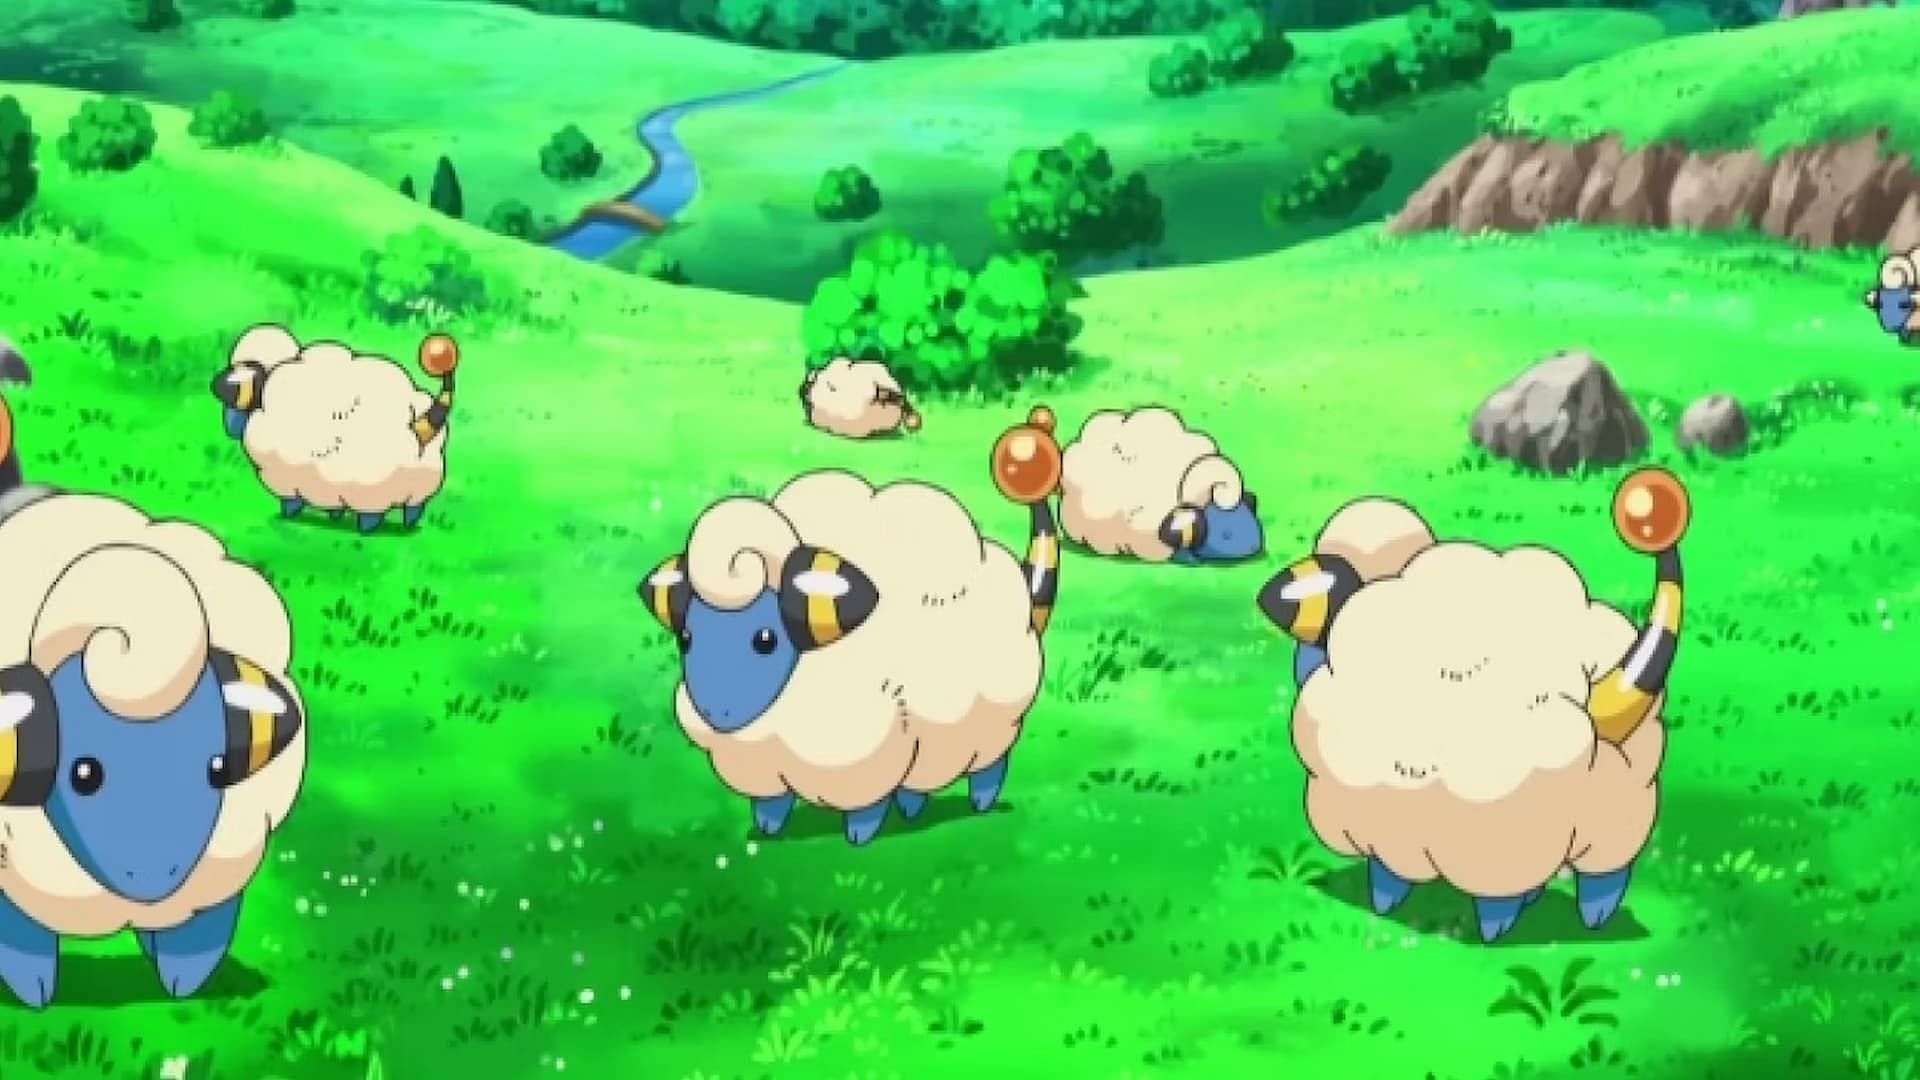 Pokemon Scarlet and Violet: How to get Mareep, Flaaffy, and Ampharos